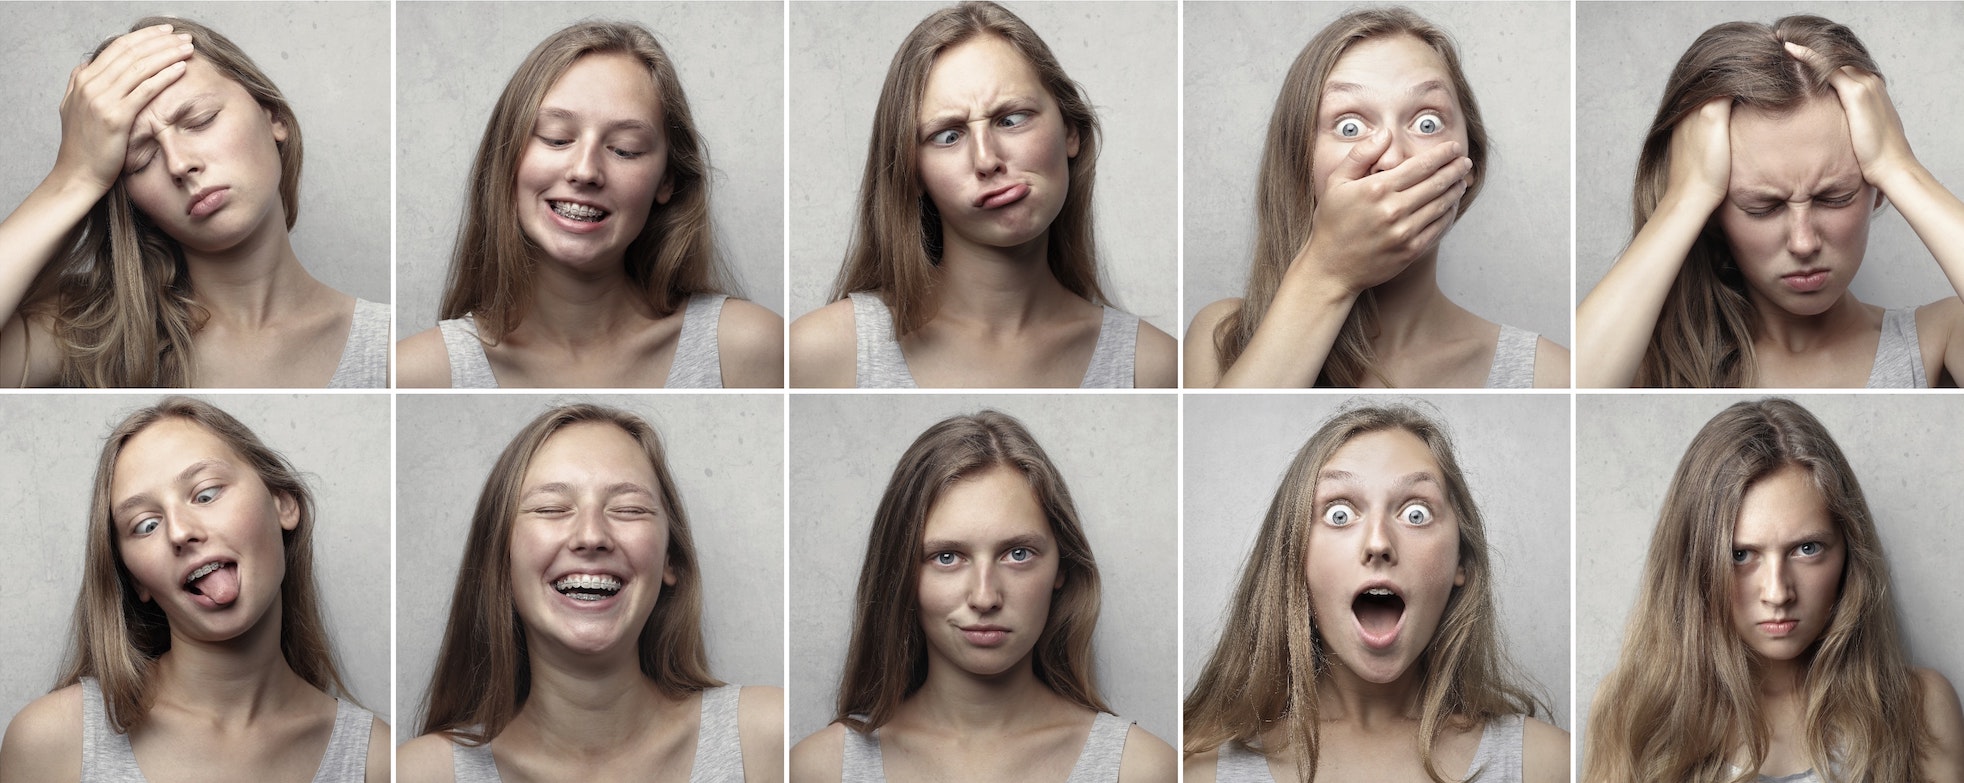 girl in series of small photos expressing different emotions